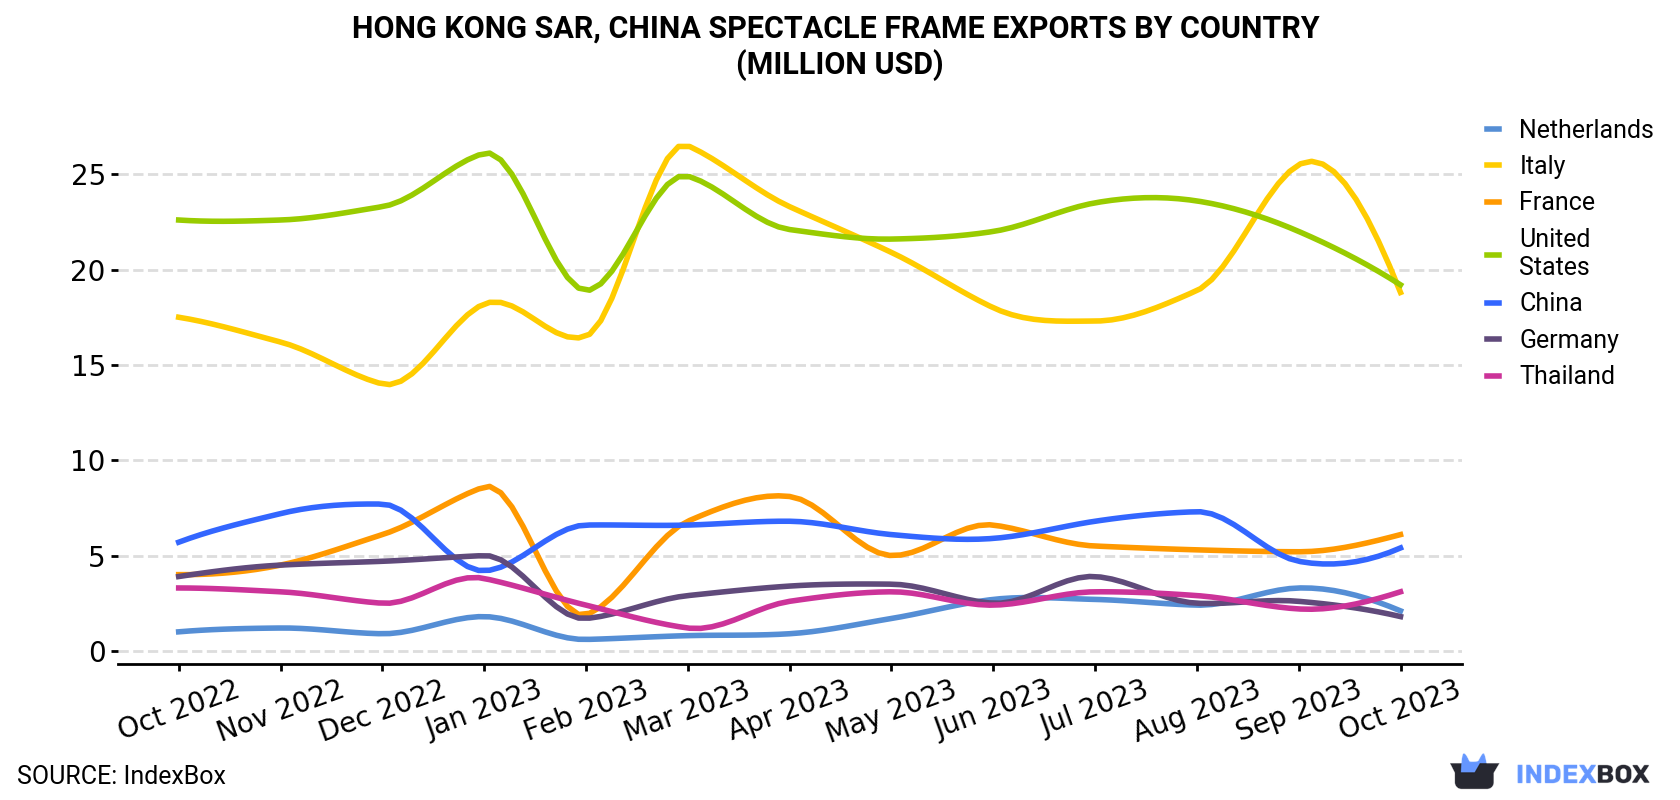 Hong Kong Spectacle Frame Exports By Country (Million USD)